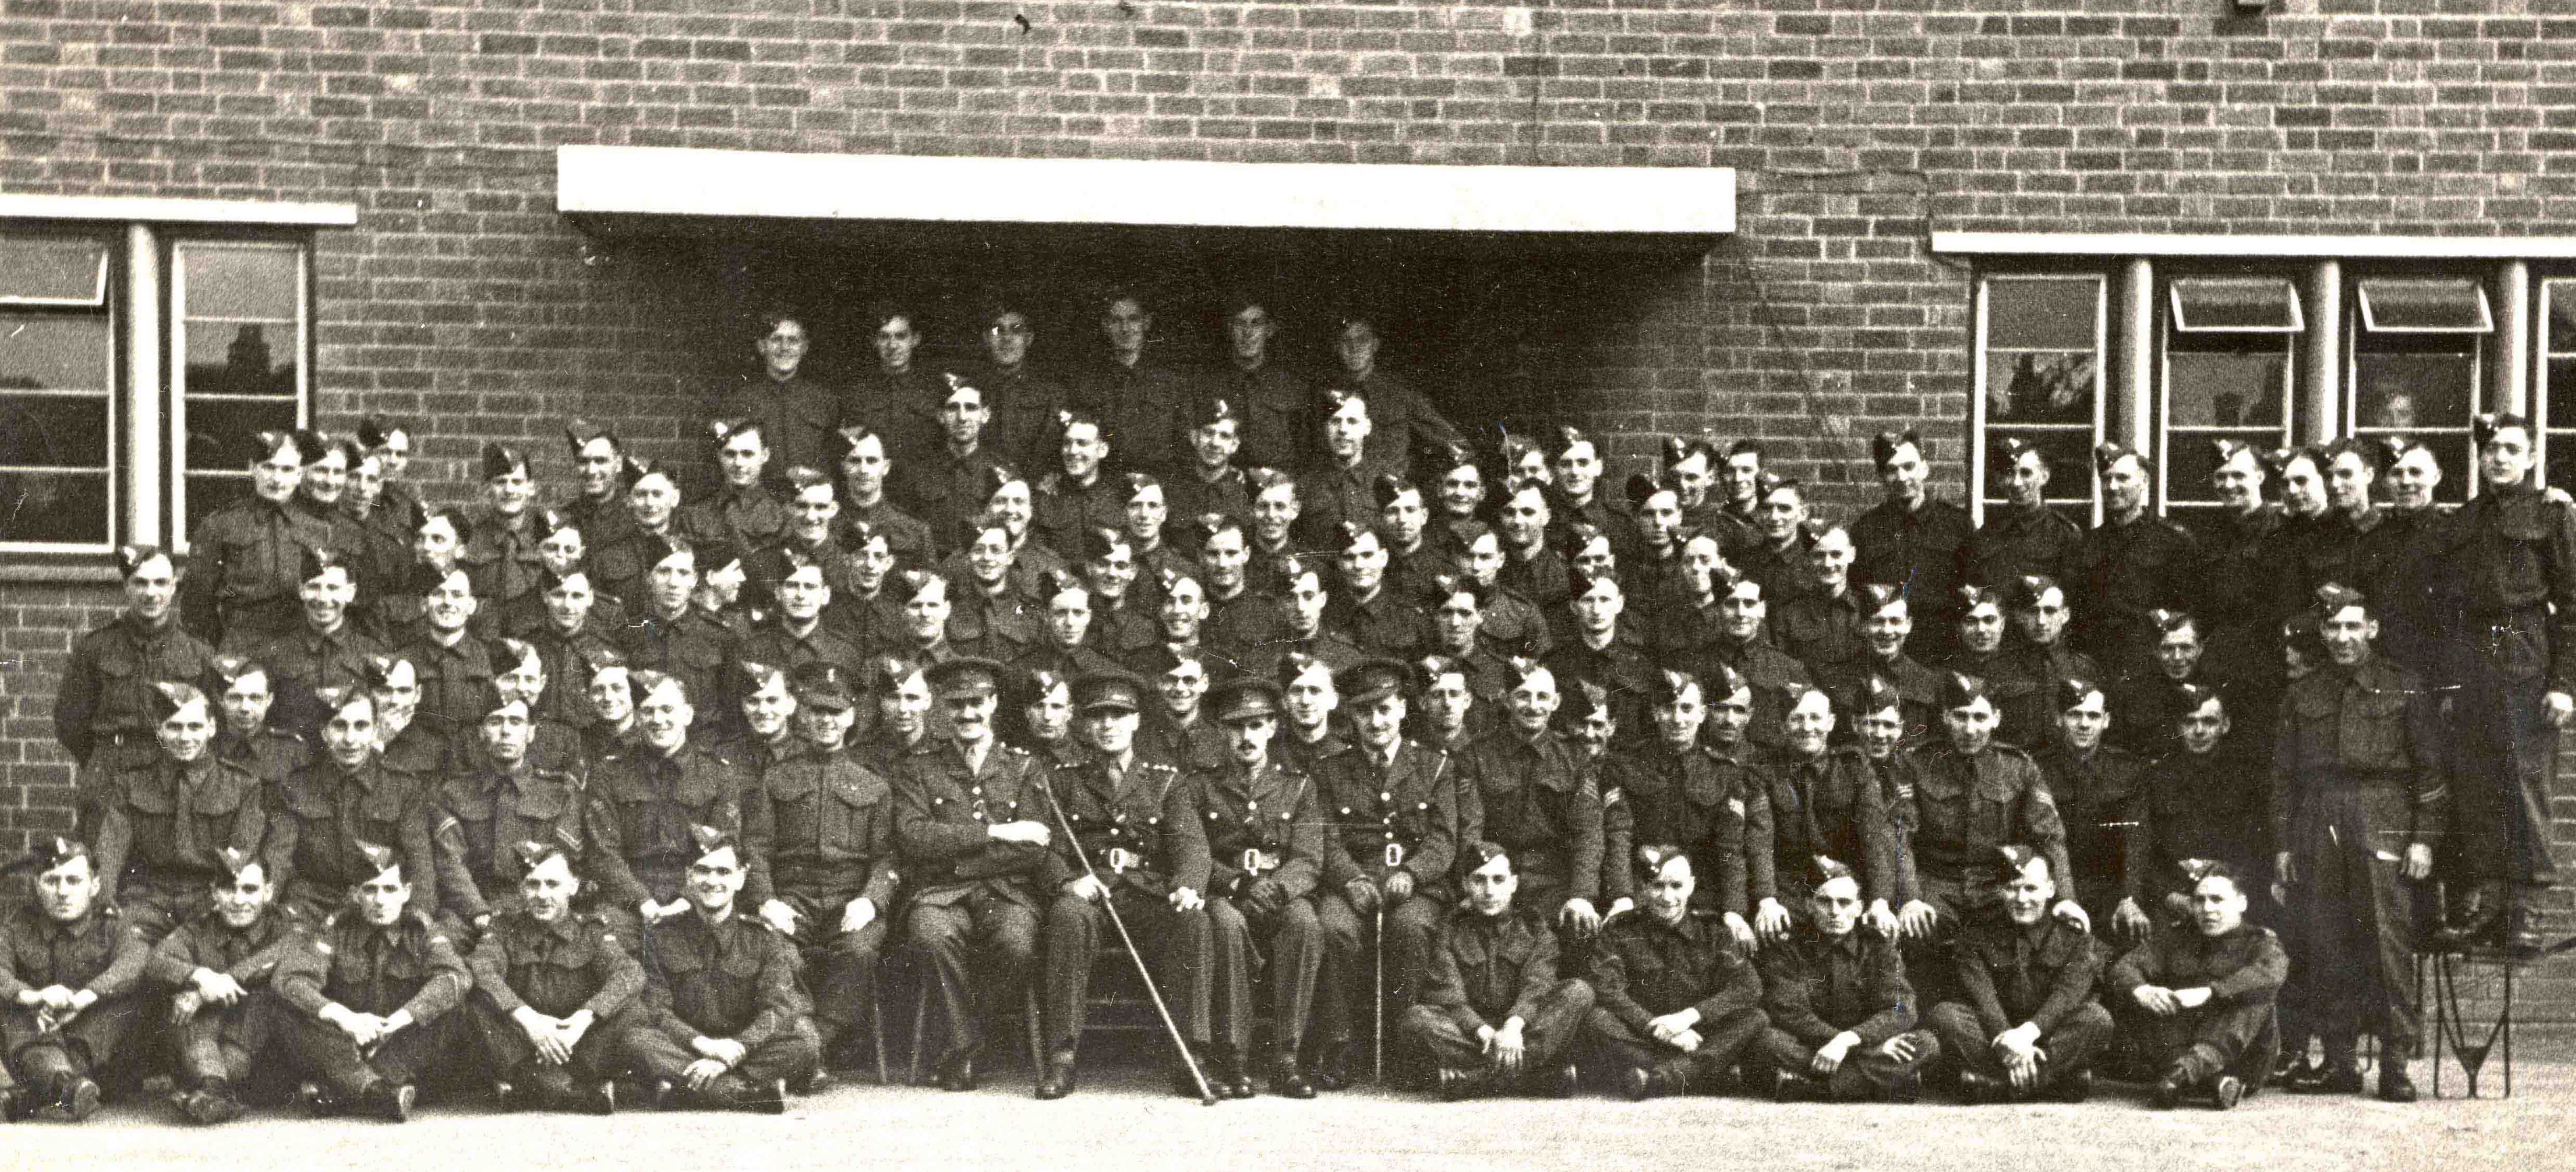 4th Bn Royal Norfolks D Coy Ross on Wye Oct 1941 D Company-1